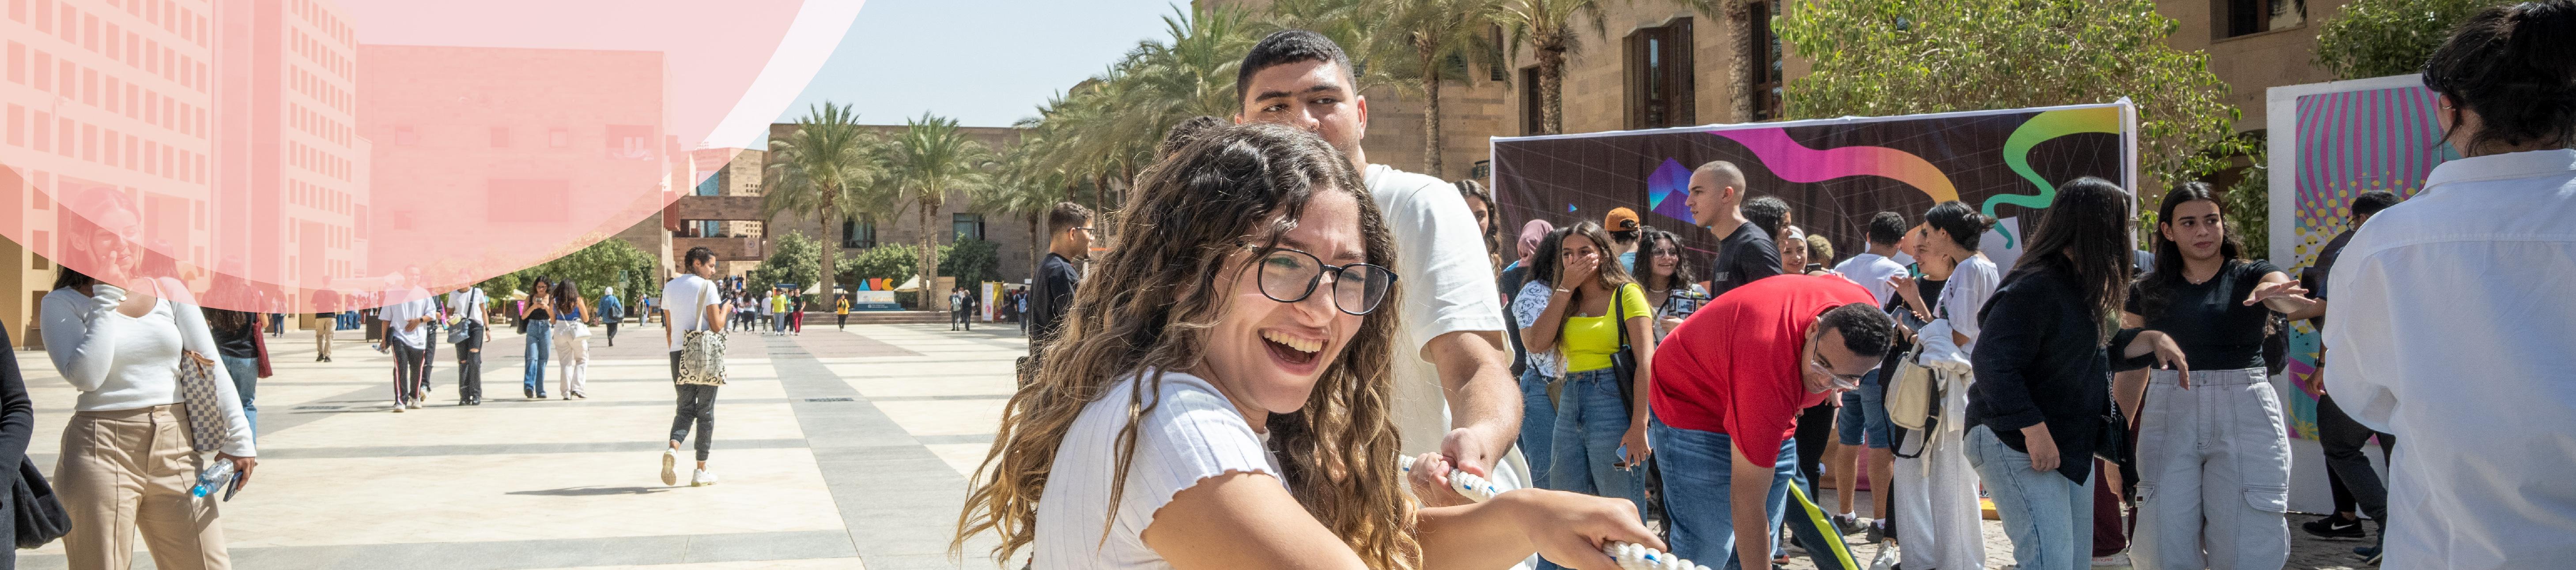 Girl in auc plaza playing tug of war smiling